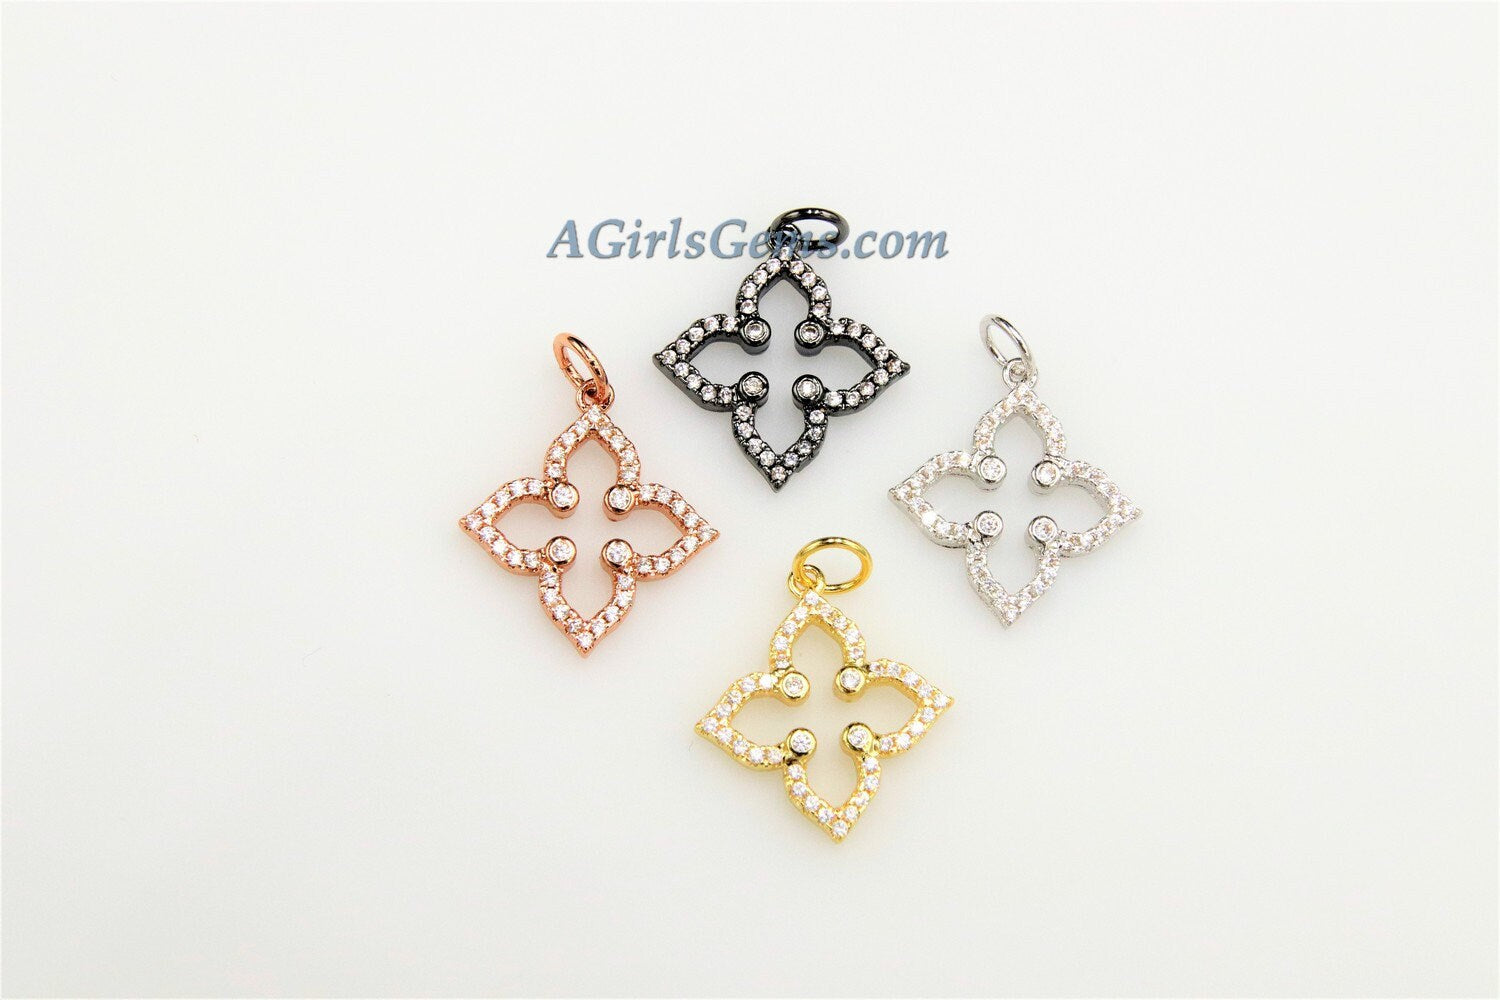 CZ Micro Pave Clover Quatrefoil Charms #59, 18 k Silver/Gold or Black Rhodium Plated CZ Flowers 4 Point Star Necklace/Bracelet Tiny Charms